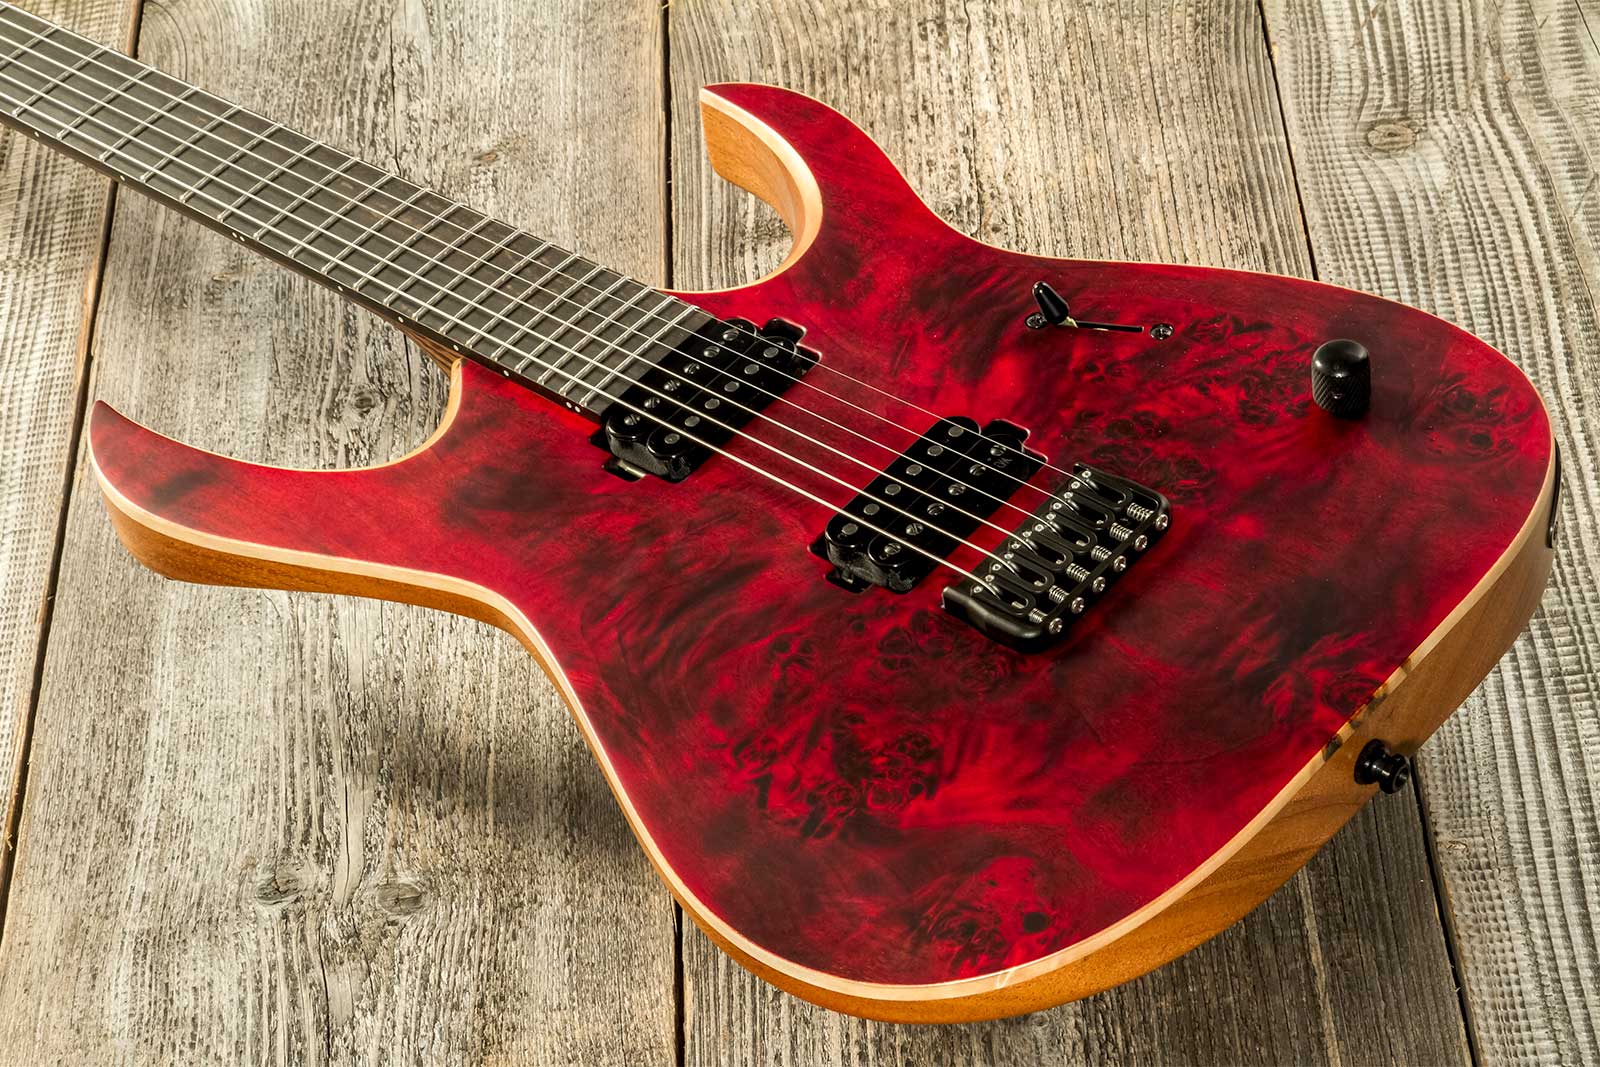 Mayones Guitars Duvell Elite 6 2h Bare Knuckle Ht Eb #df2301294 - Trans Dirty Red Satine - Metal electric guitar - Variation 2